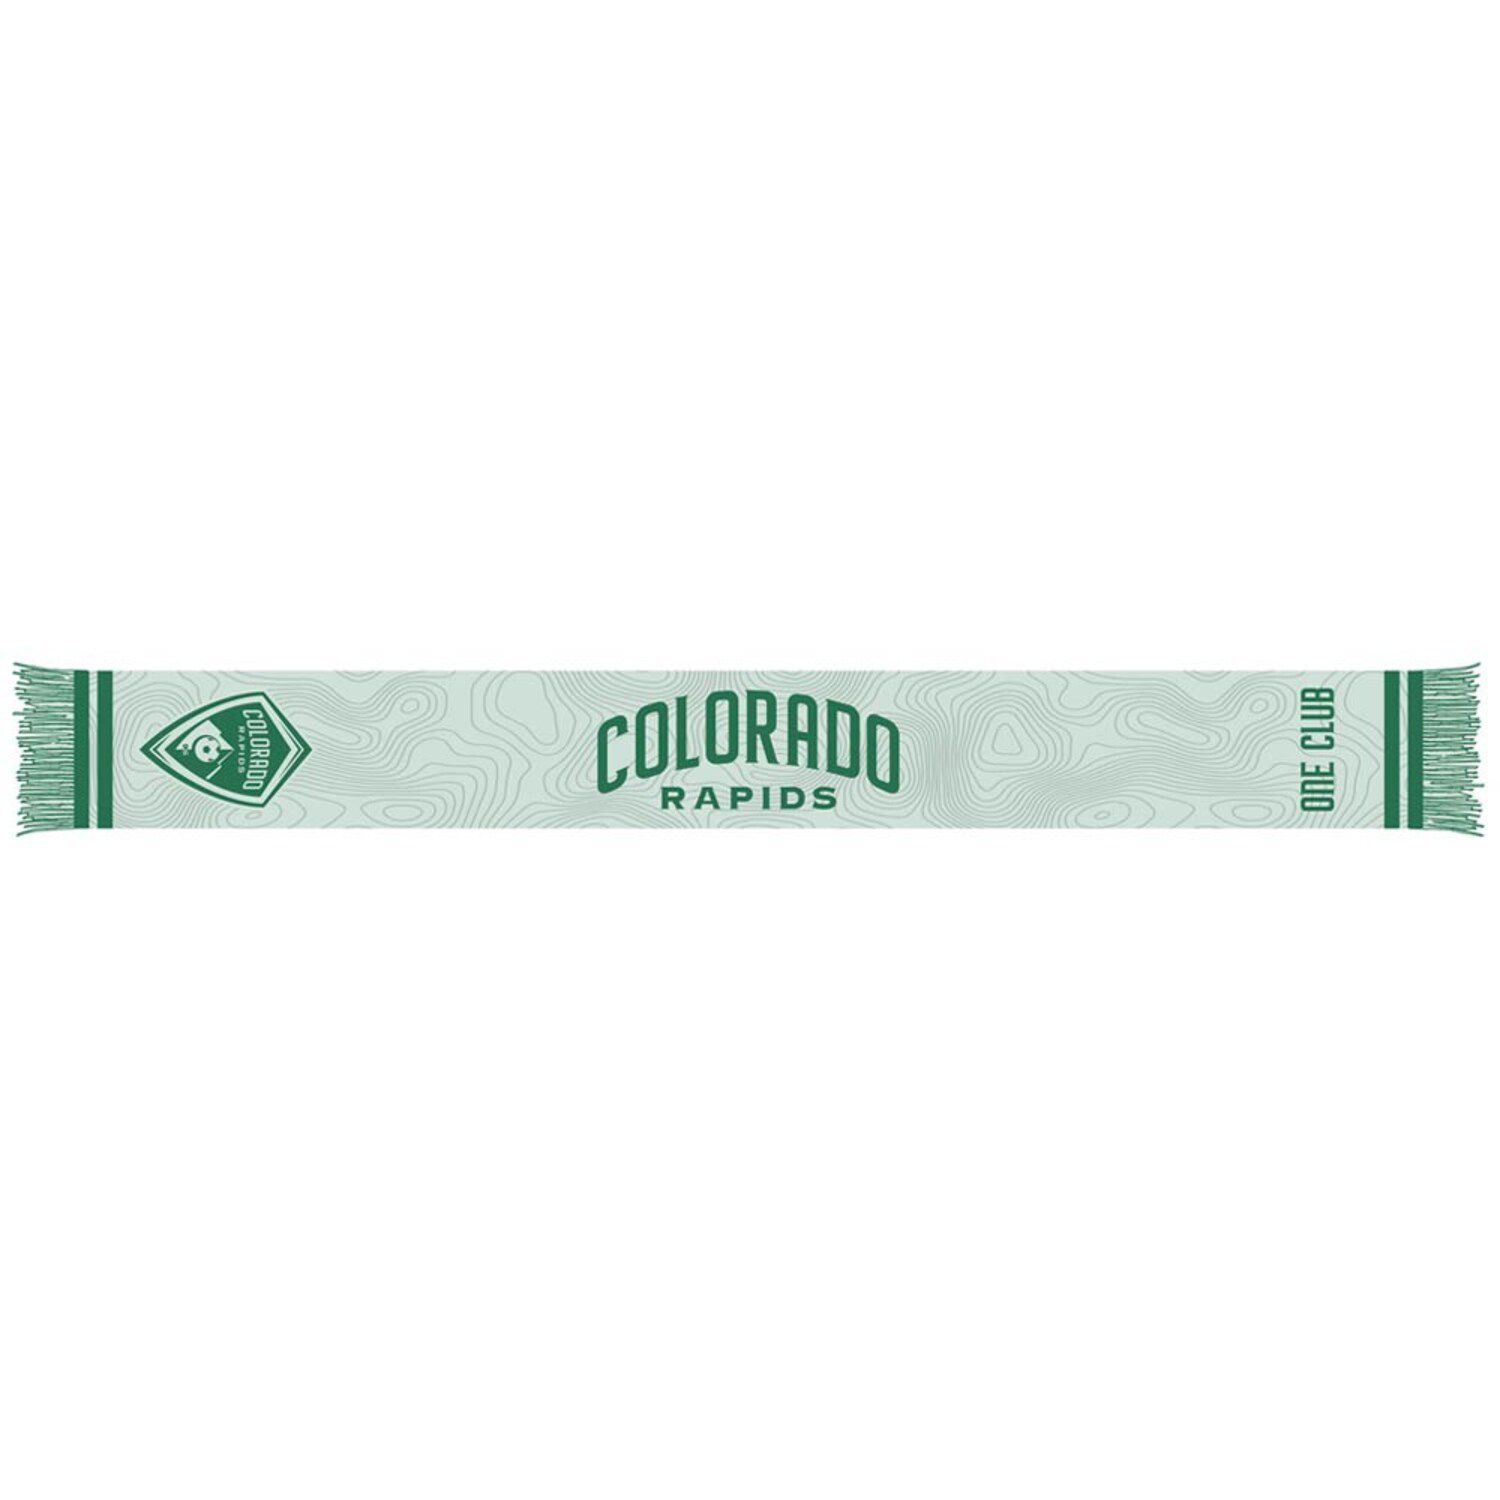 Image for Unbranded Colorado Rapids Jersey Hook Scarf at Kohl's.